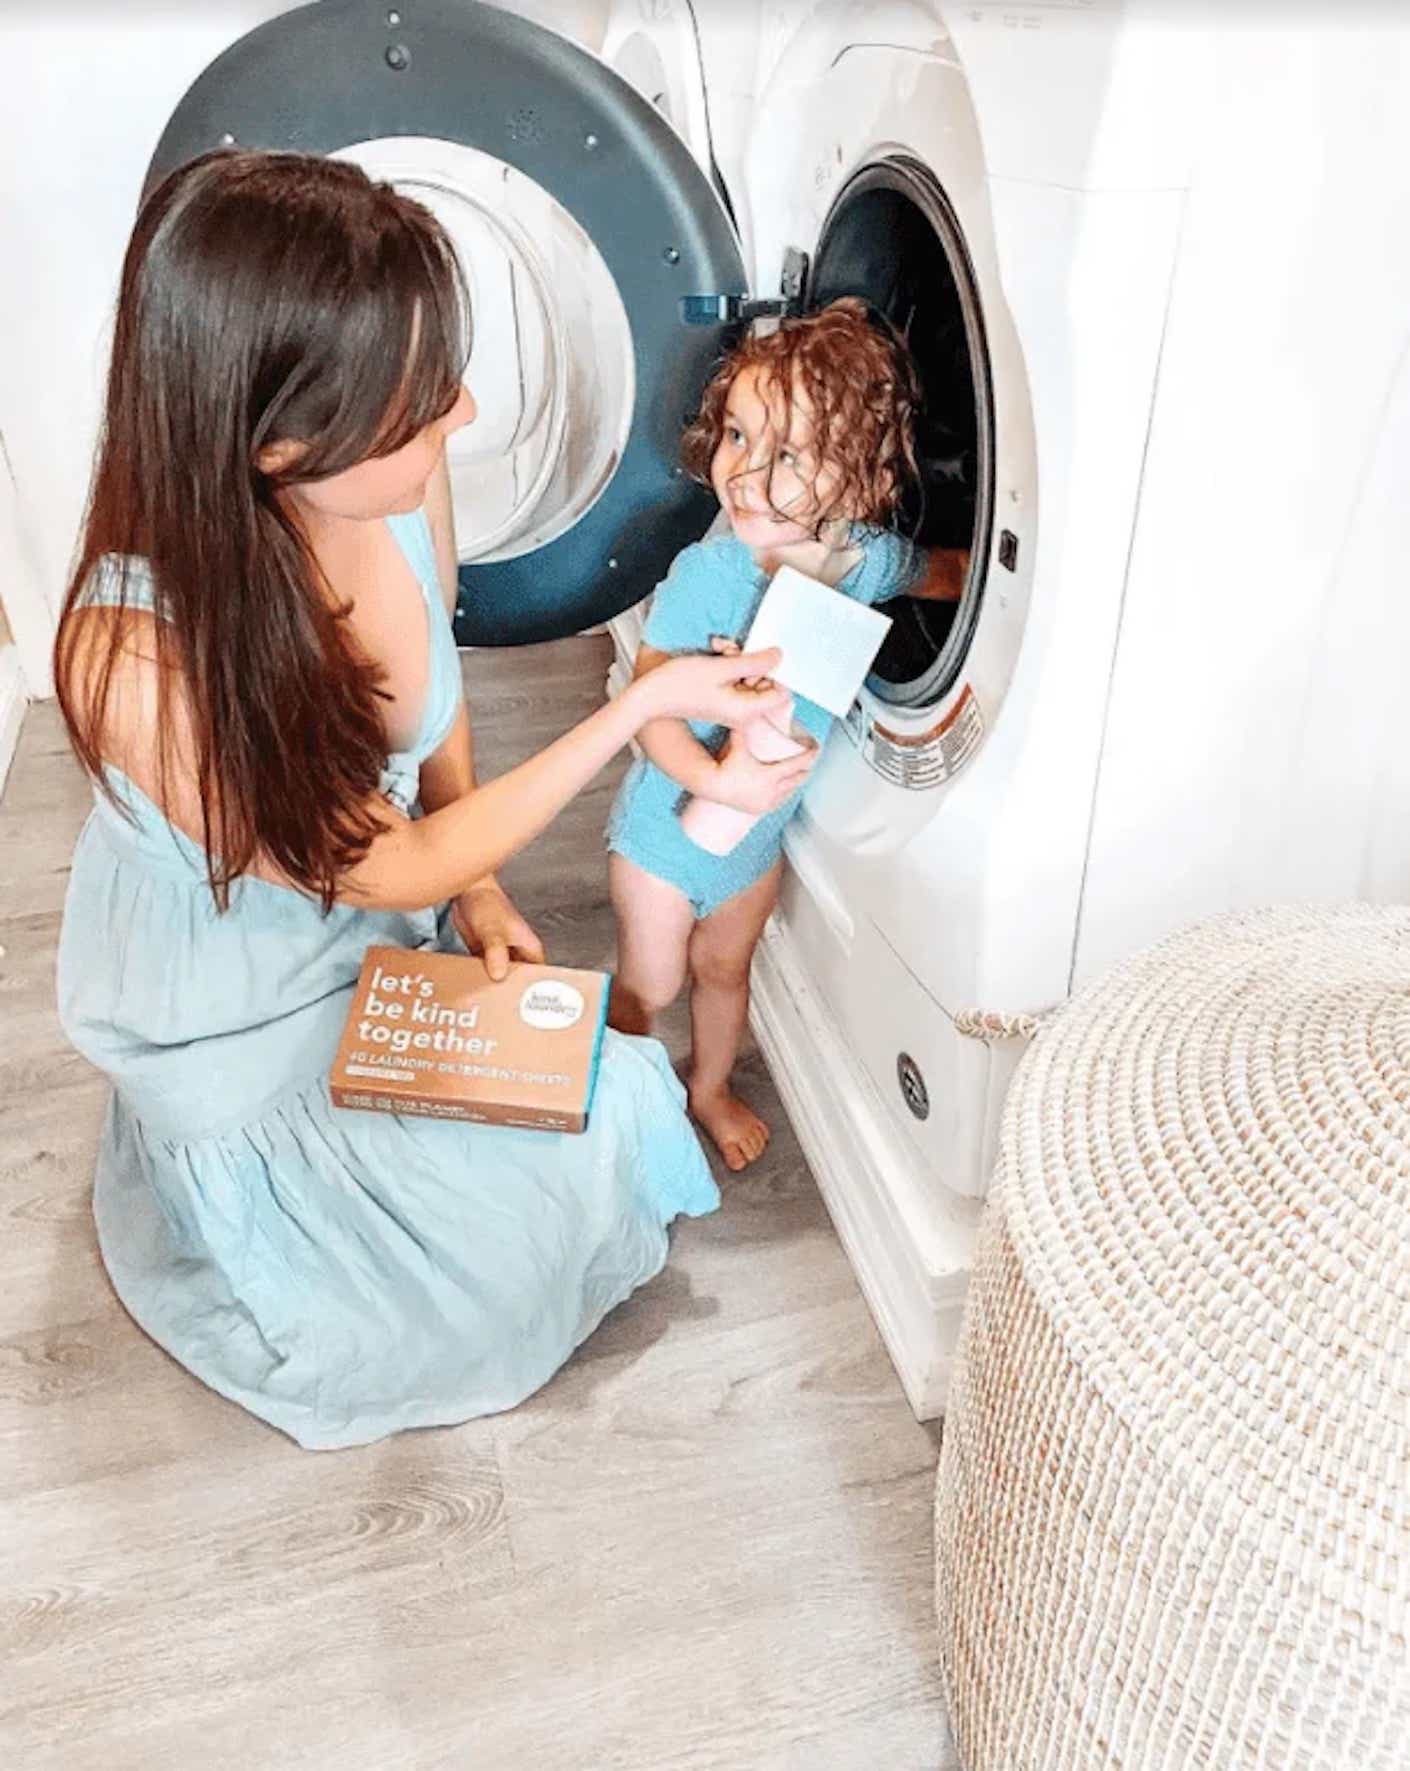 A woman and child kneel in front of a dryer with laundry sheets in hand.